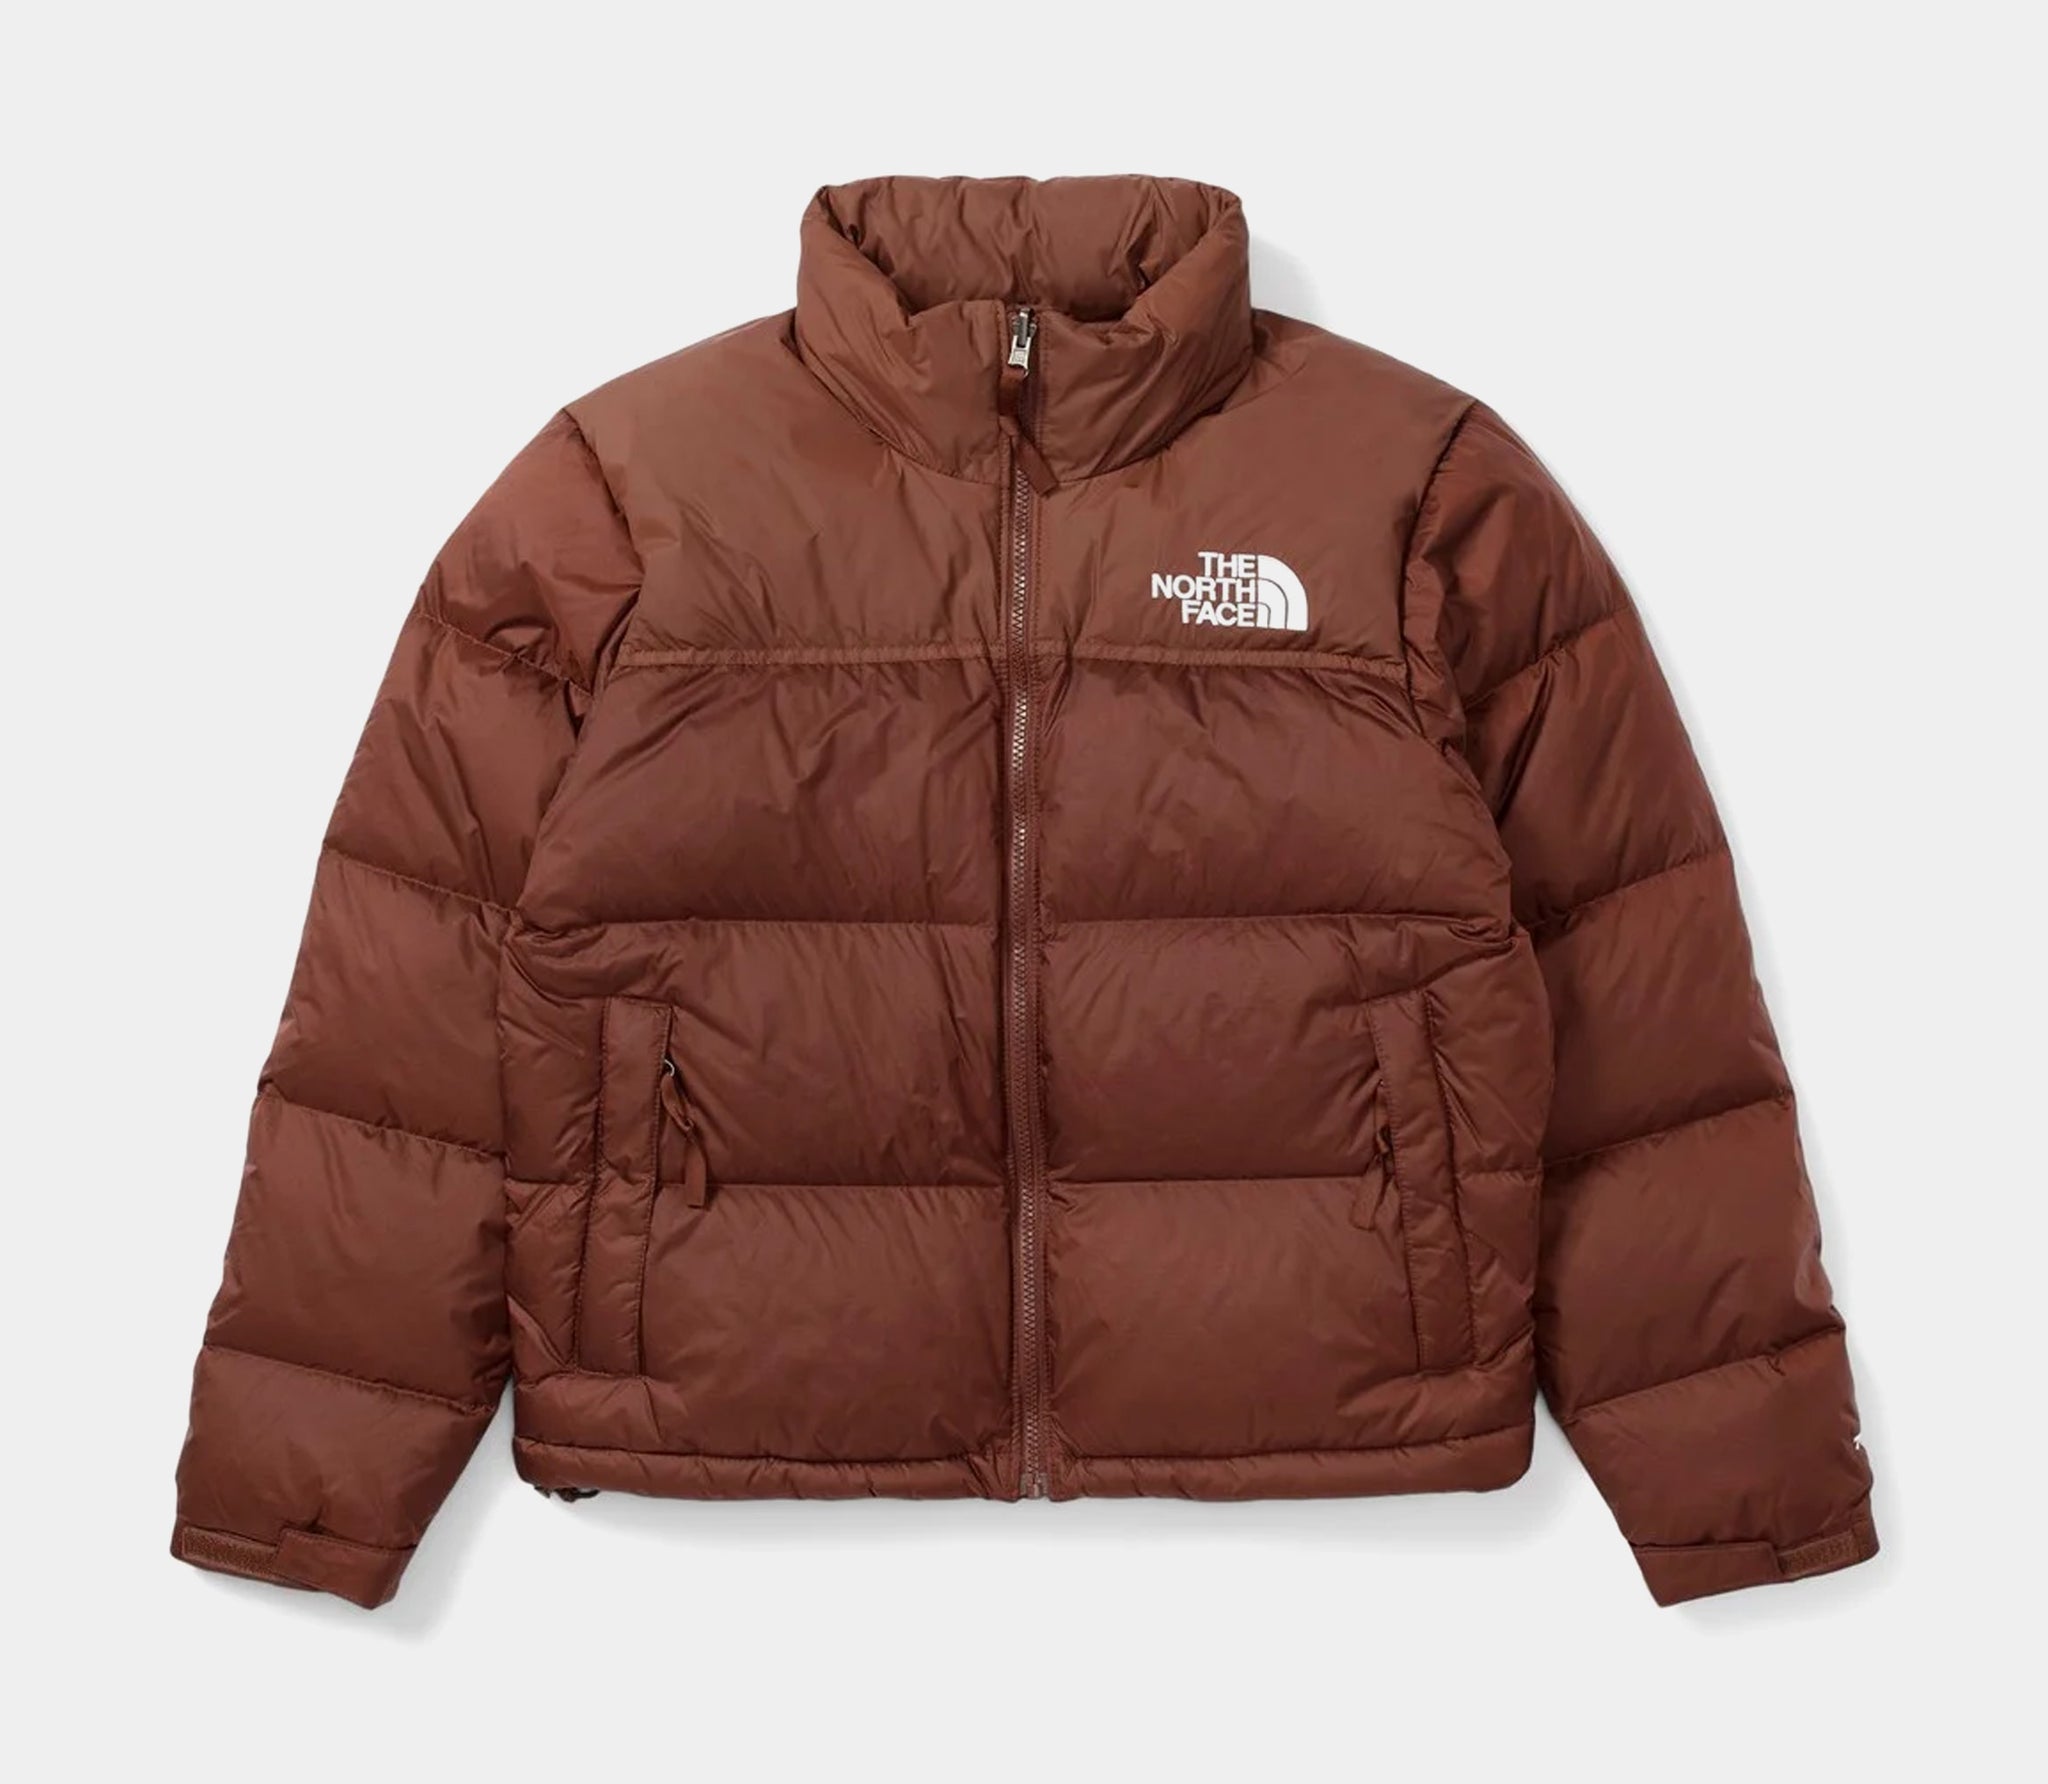 The North Face 1996 Retro Nuptse Womens Jacket Brown NF0A3XE0-6S2